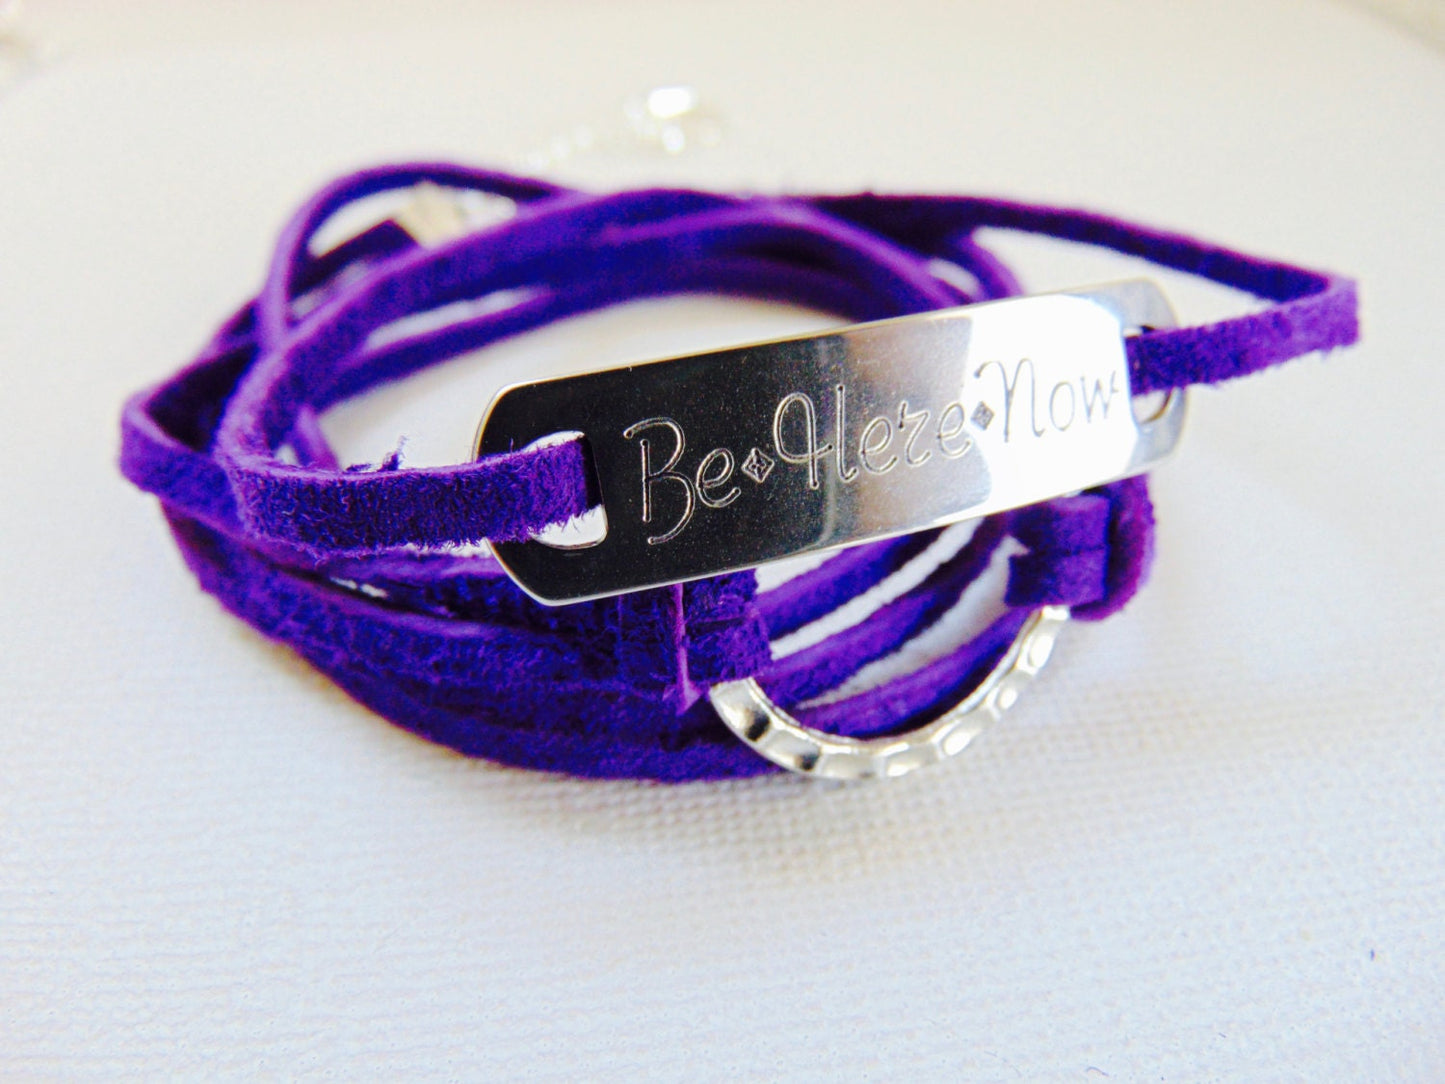 Personalized wrap leather bracelet in purple/turquoise/Tan